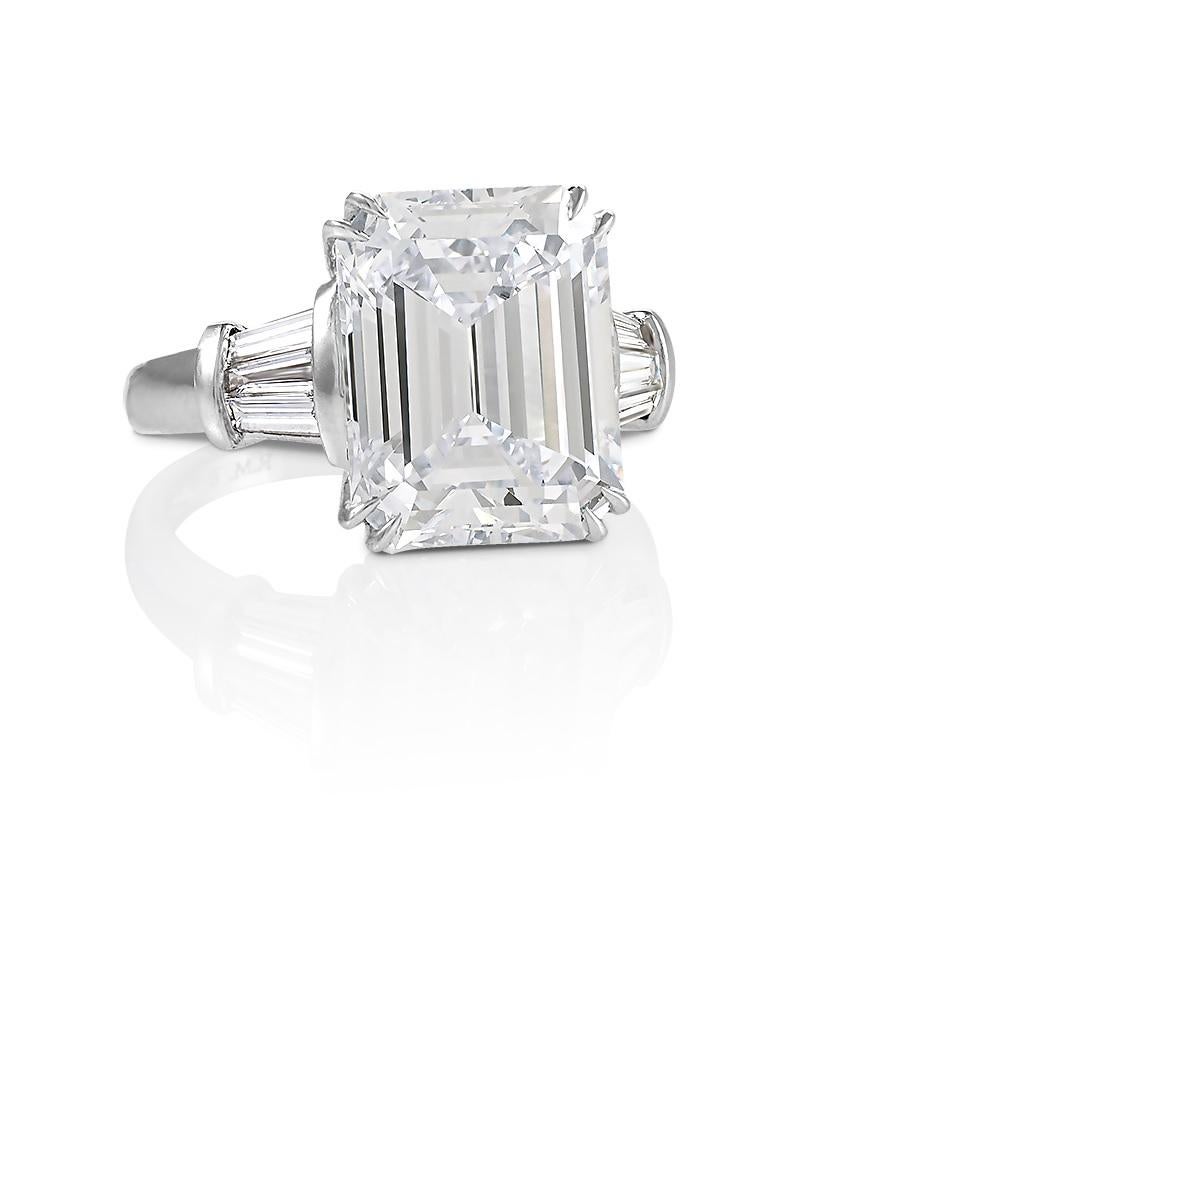 Any emerald-cut lover will fall for this nearly eight-carat diamond classic engagement ring with its ideal platinum proportions, mirrored depths, and broad flashes of white light. The emerald-cut diamond was the result of increasing precision and